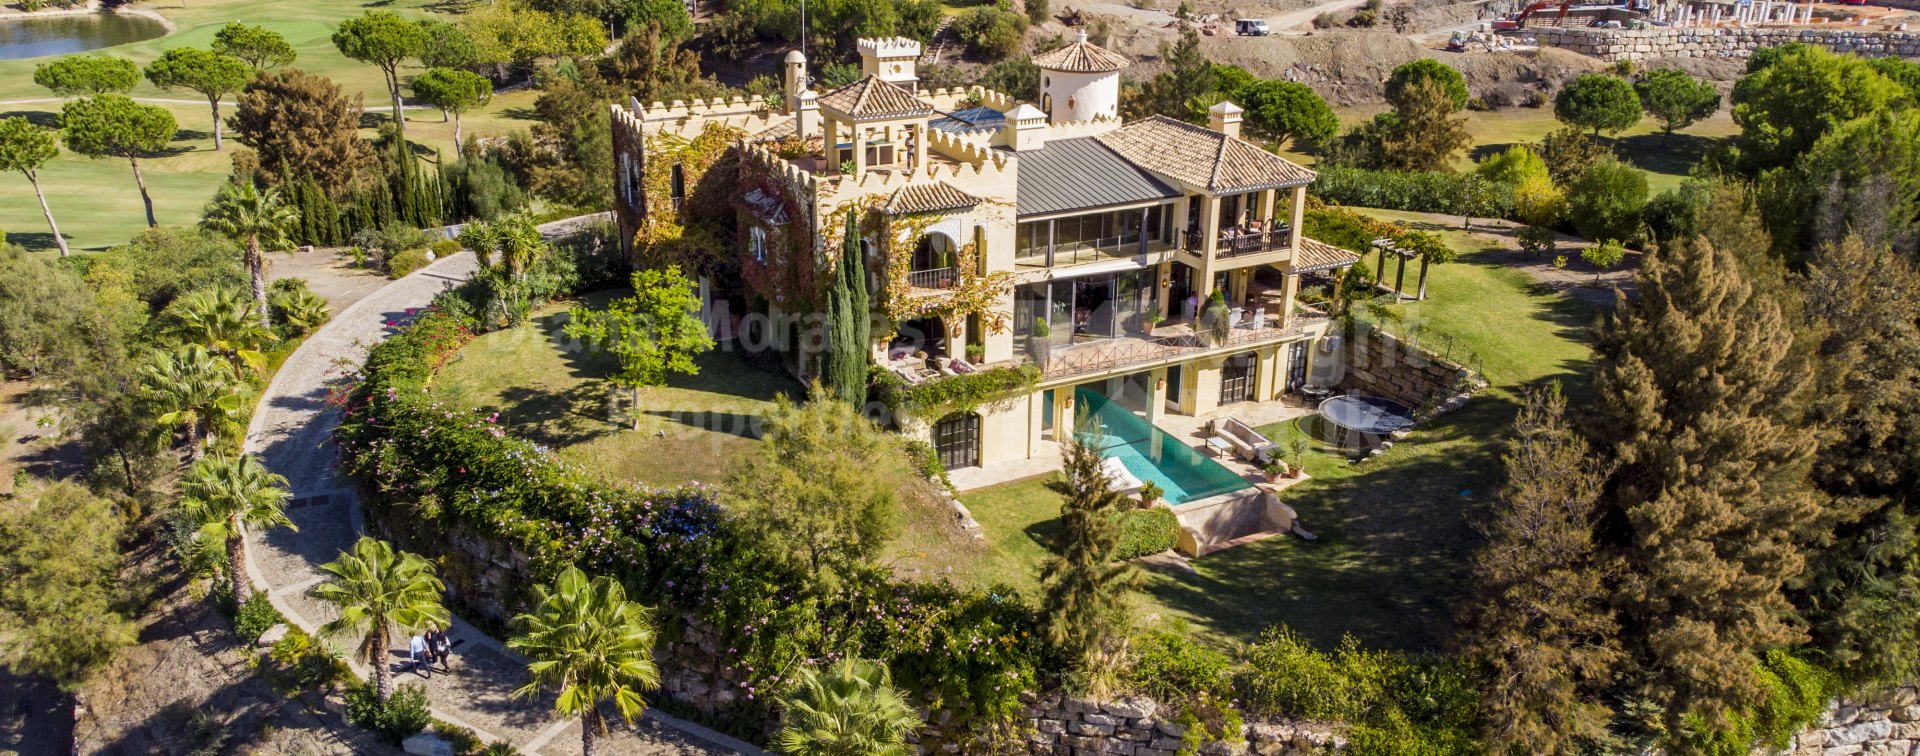 Marbella Club Golf Resort, Alhambra-style house in prestigious location with spectacular views